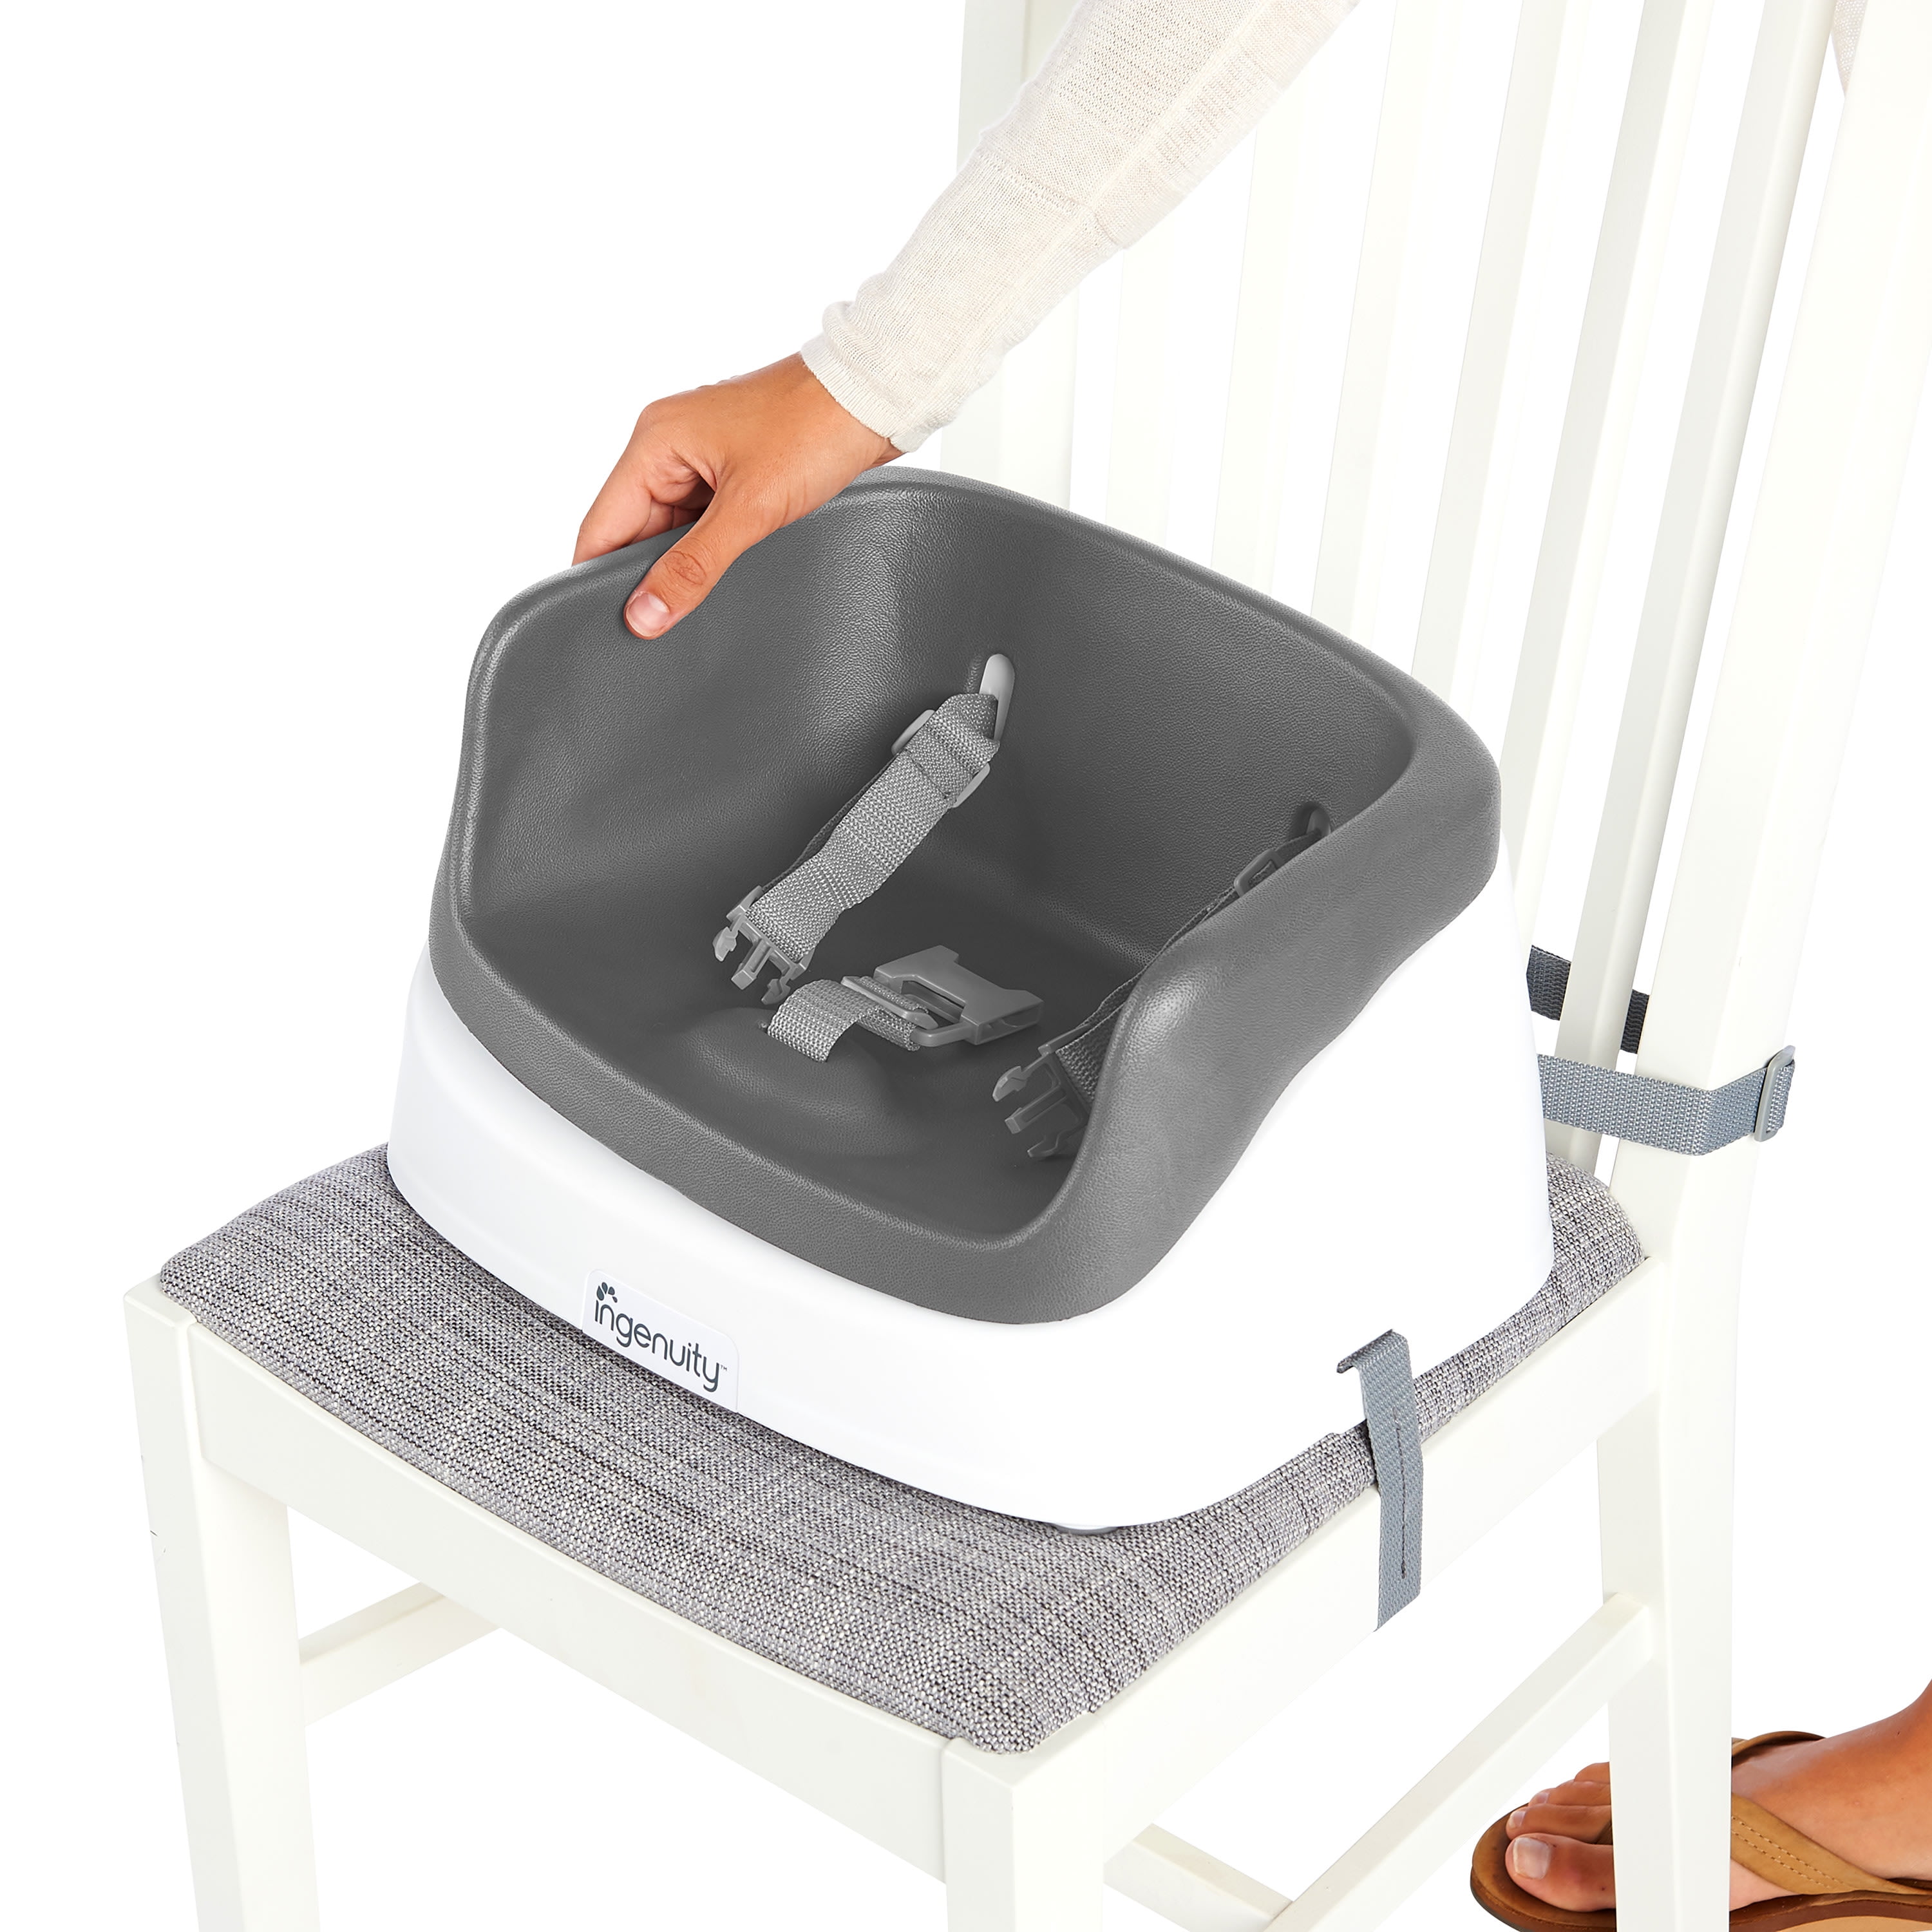 Ingenuity Slate Gray SmartClean Toddler Booster Seat